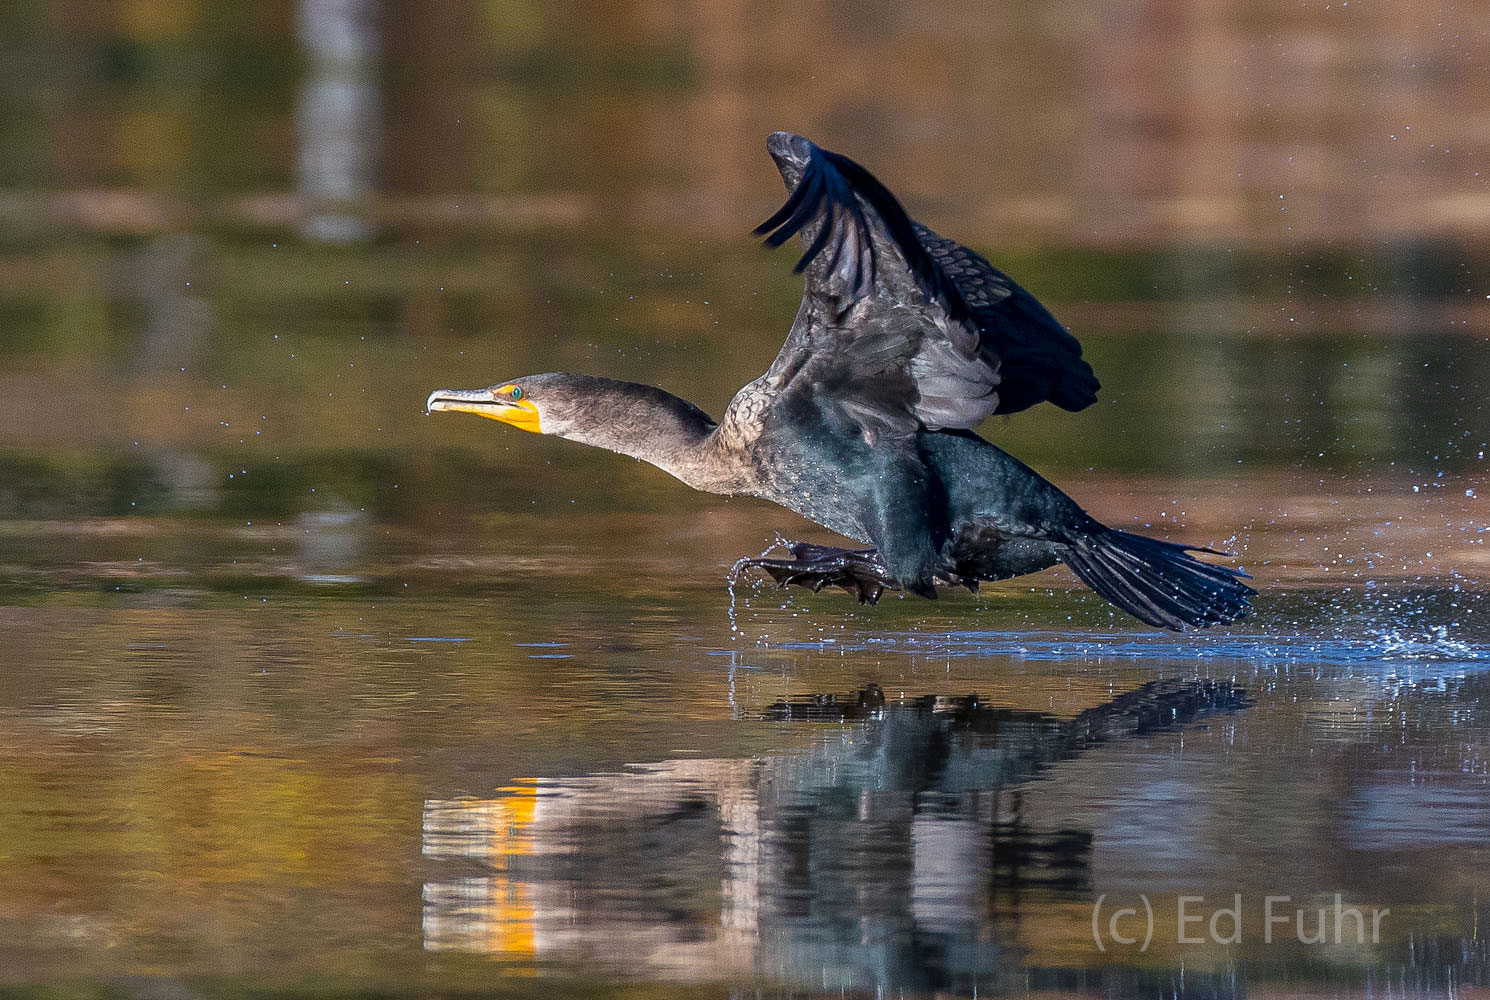 A cormorant reflects in the still waters of the James River.